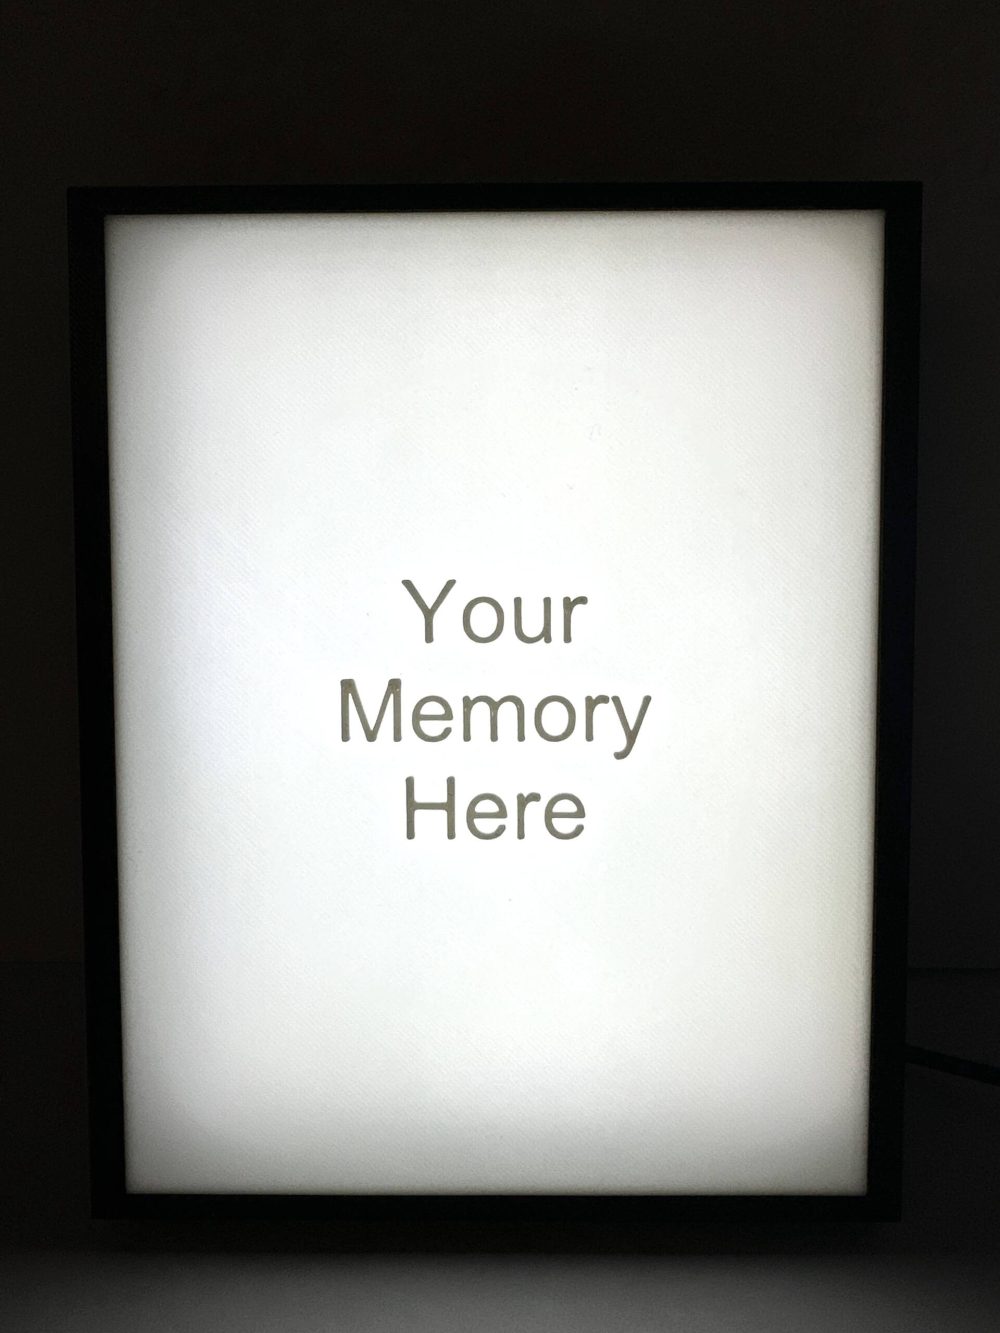 Rectangular backlit lithophane display with placeholder text "Your Memory Here."